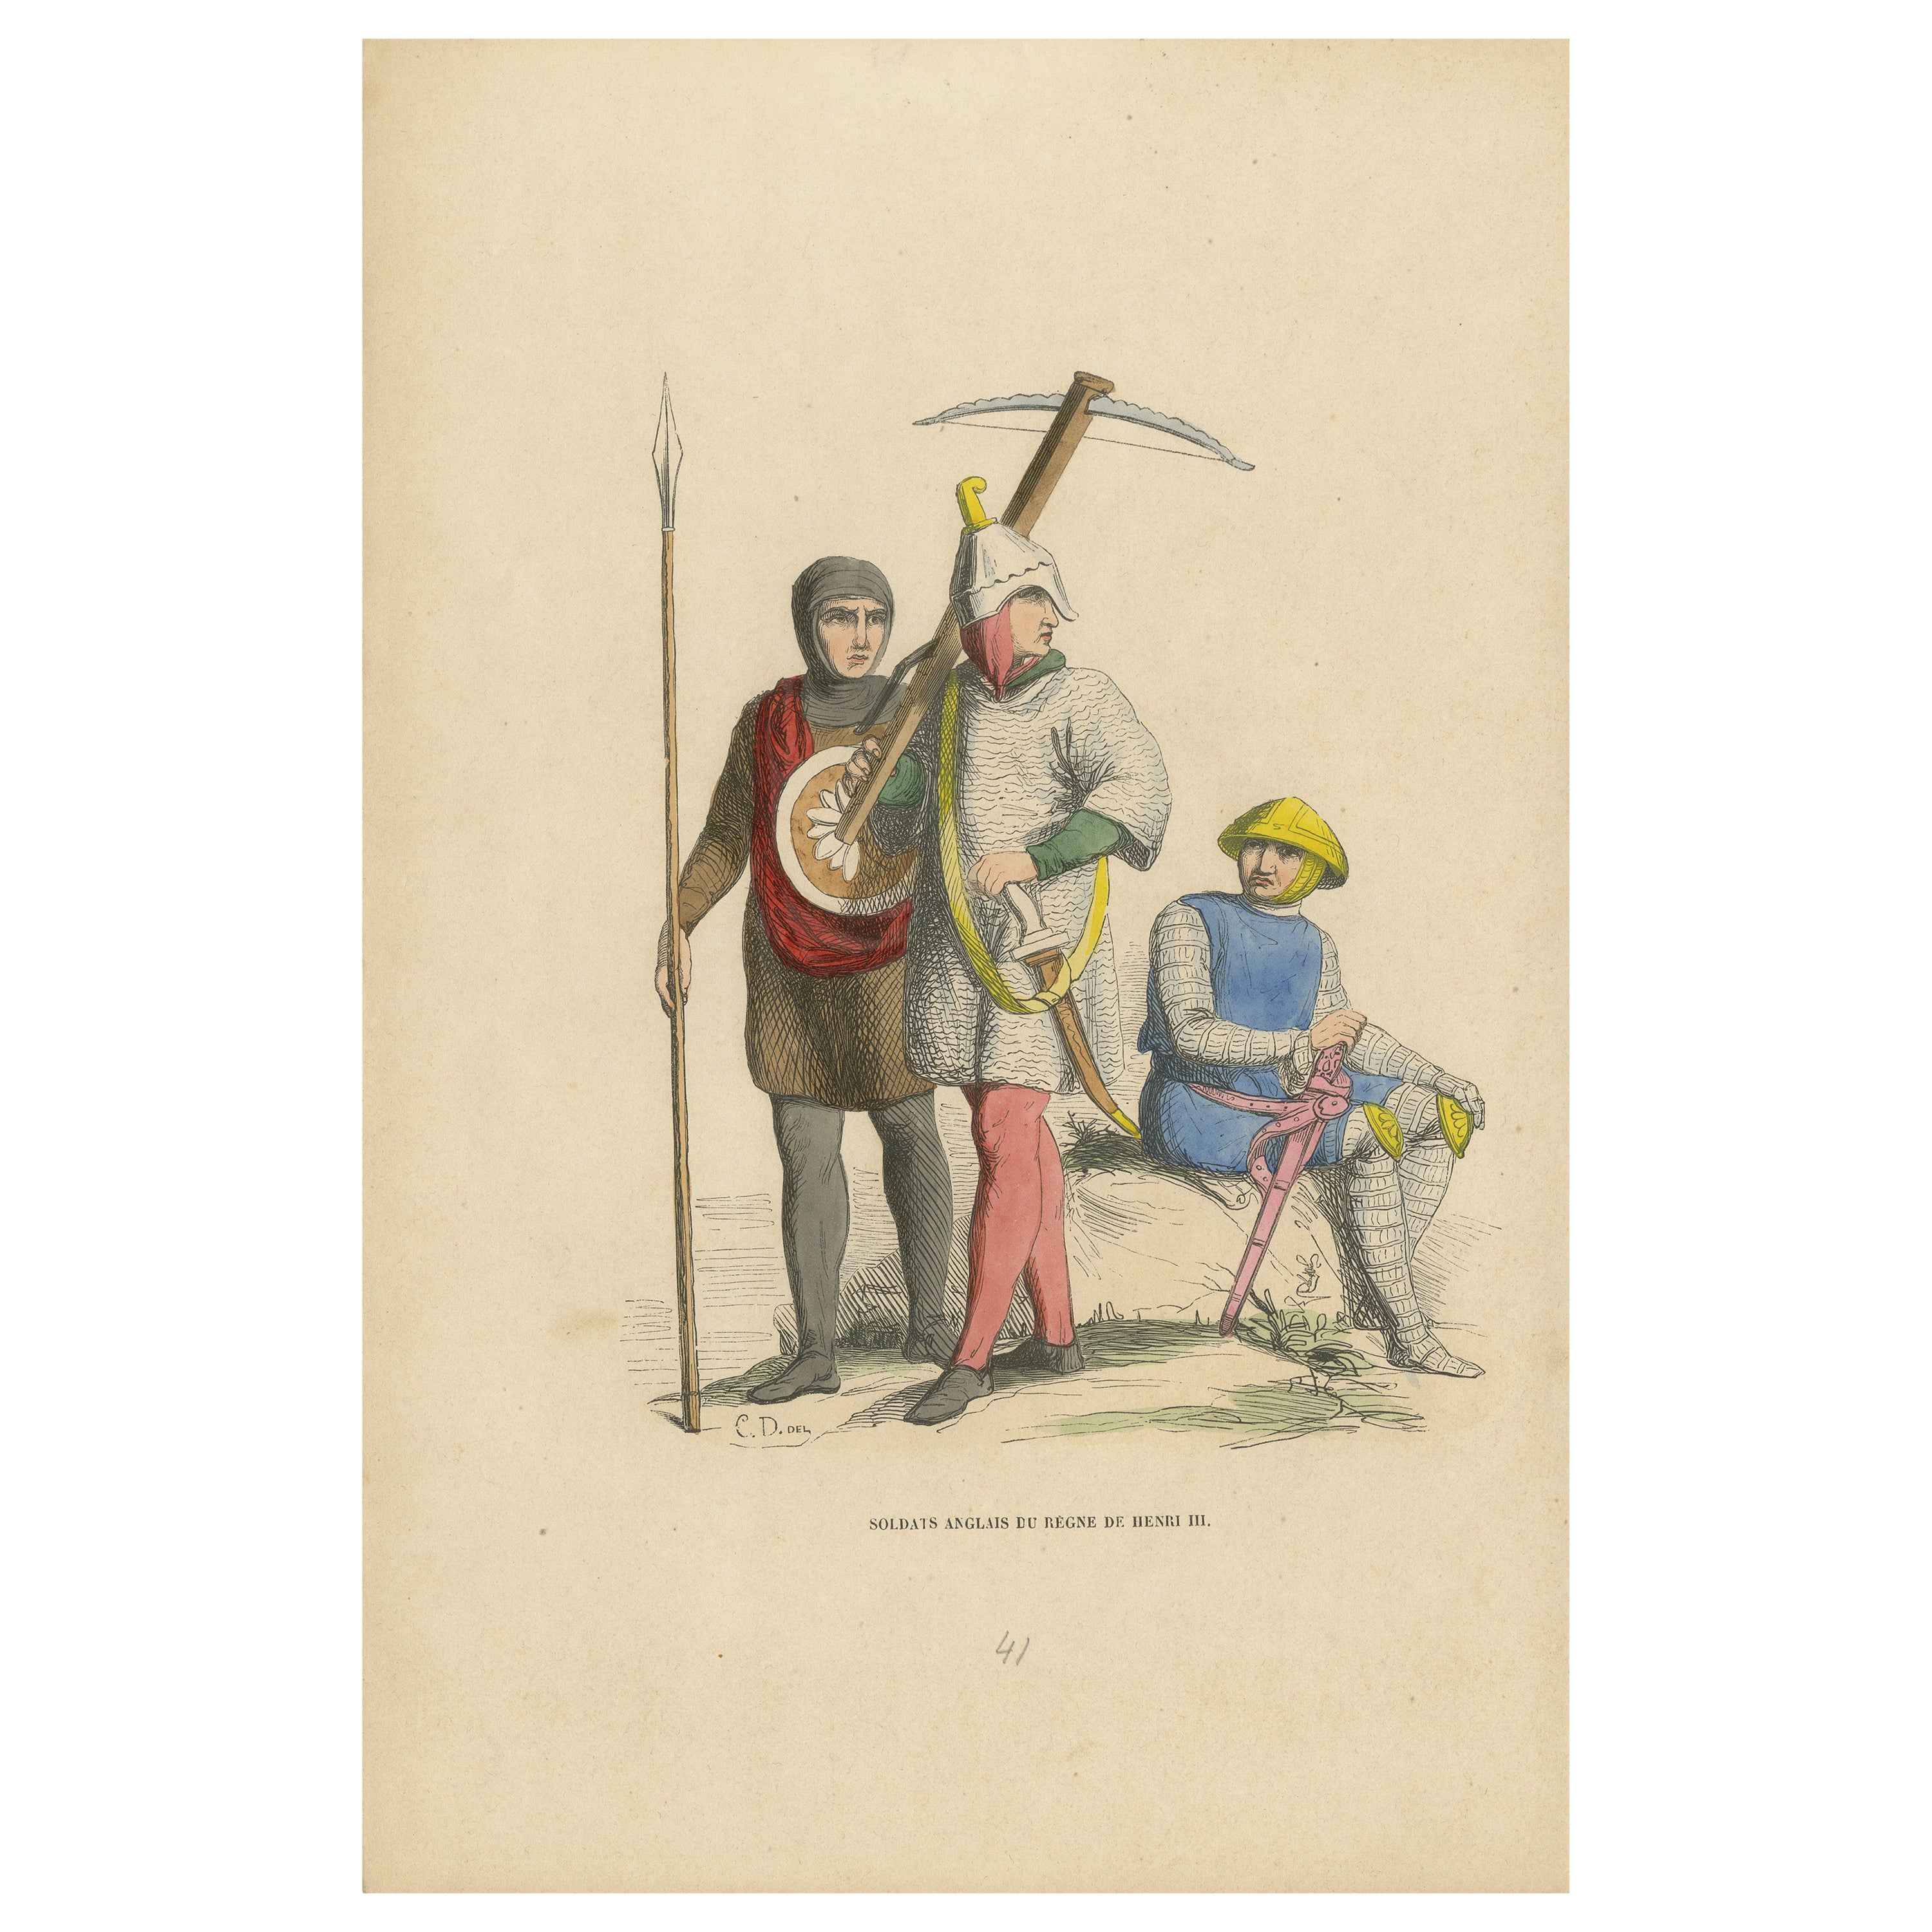 English Soldiers During the Reign of Henry III, Original Liithograph, 1847